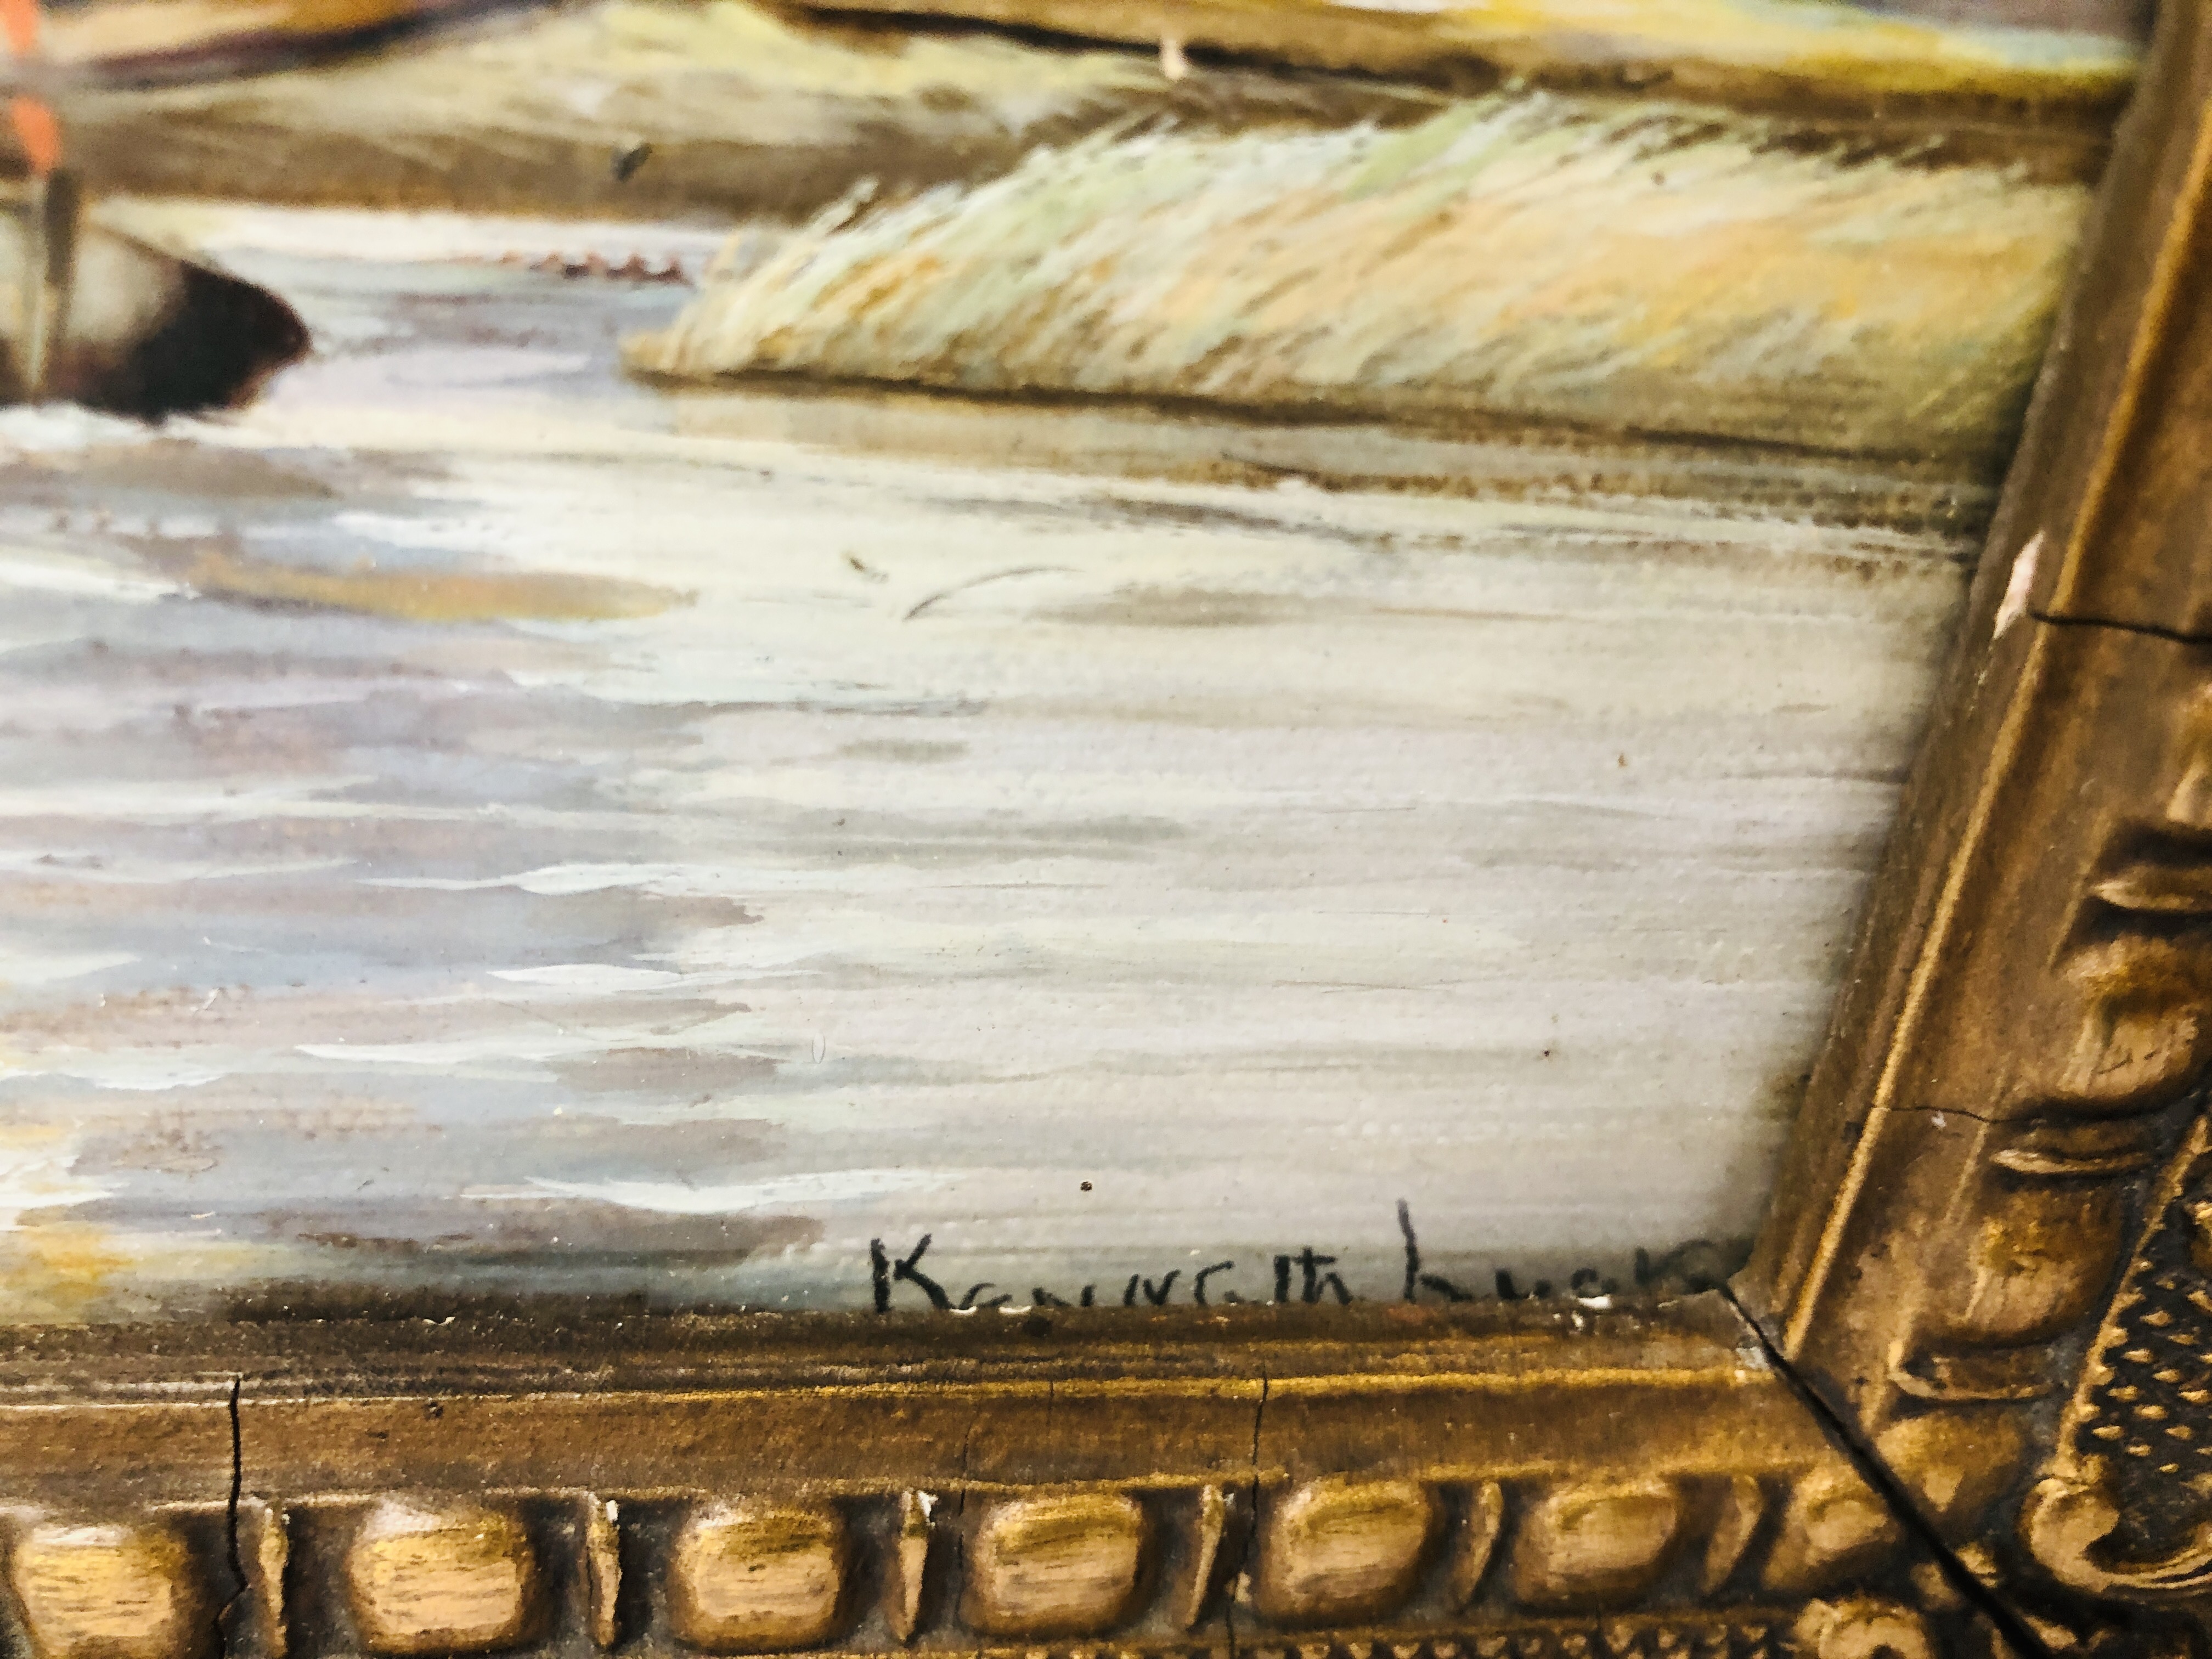 PAIR OF GILT FRAMED OIL ON BOARDS NORFOLK WHERRIES BEARING SIGNATURE KENNETH LUCK - H 19CM X W 14CM. - Image 6 of 6